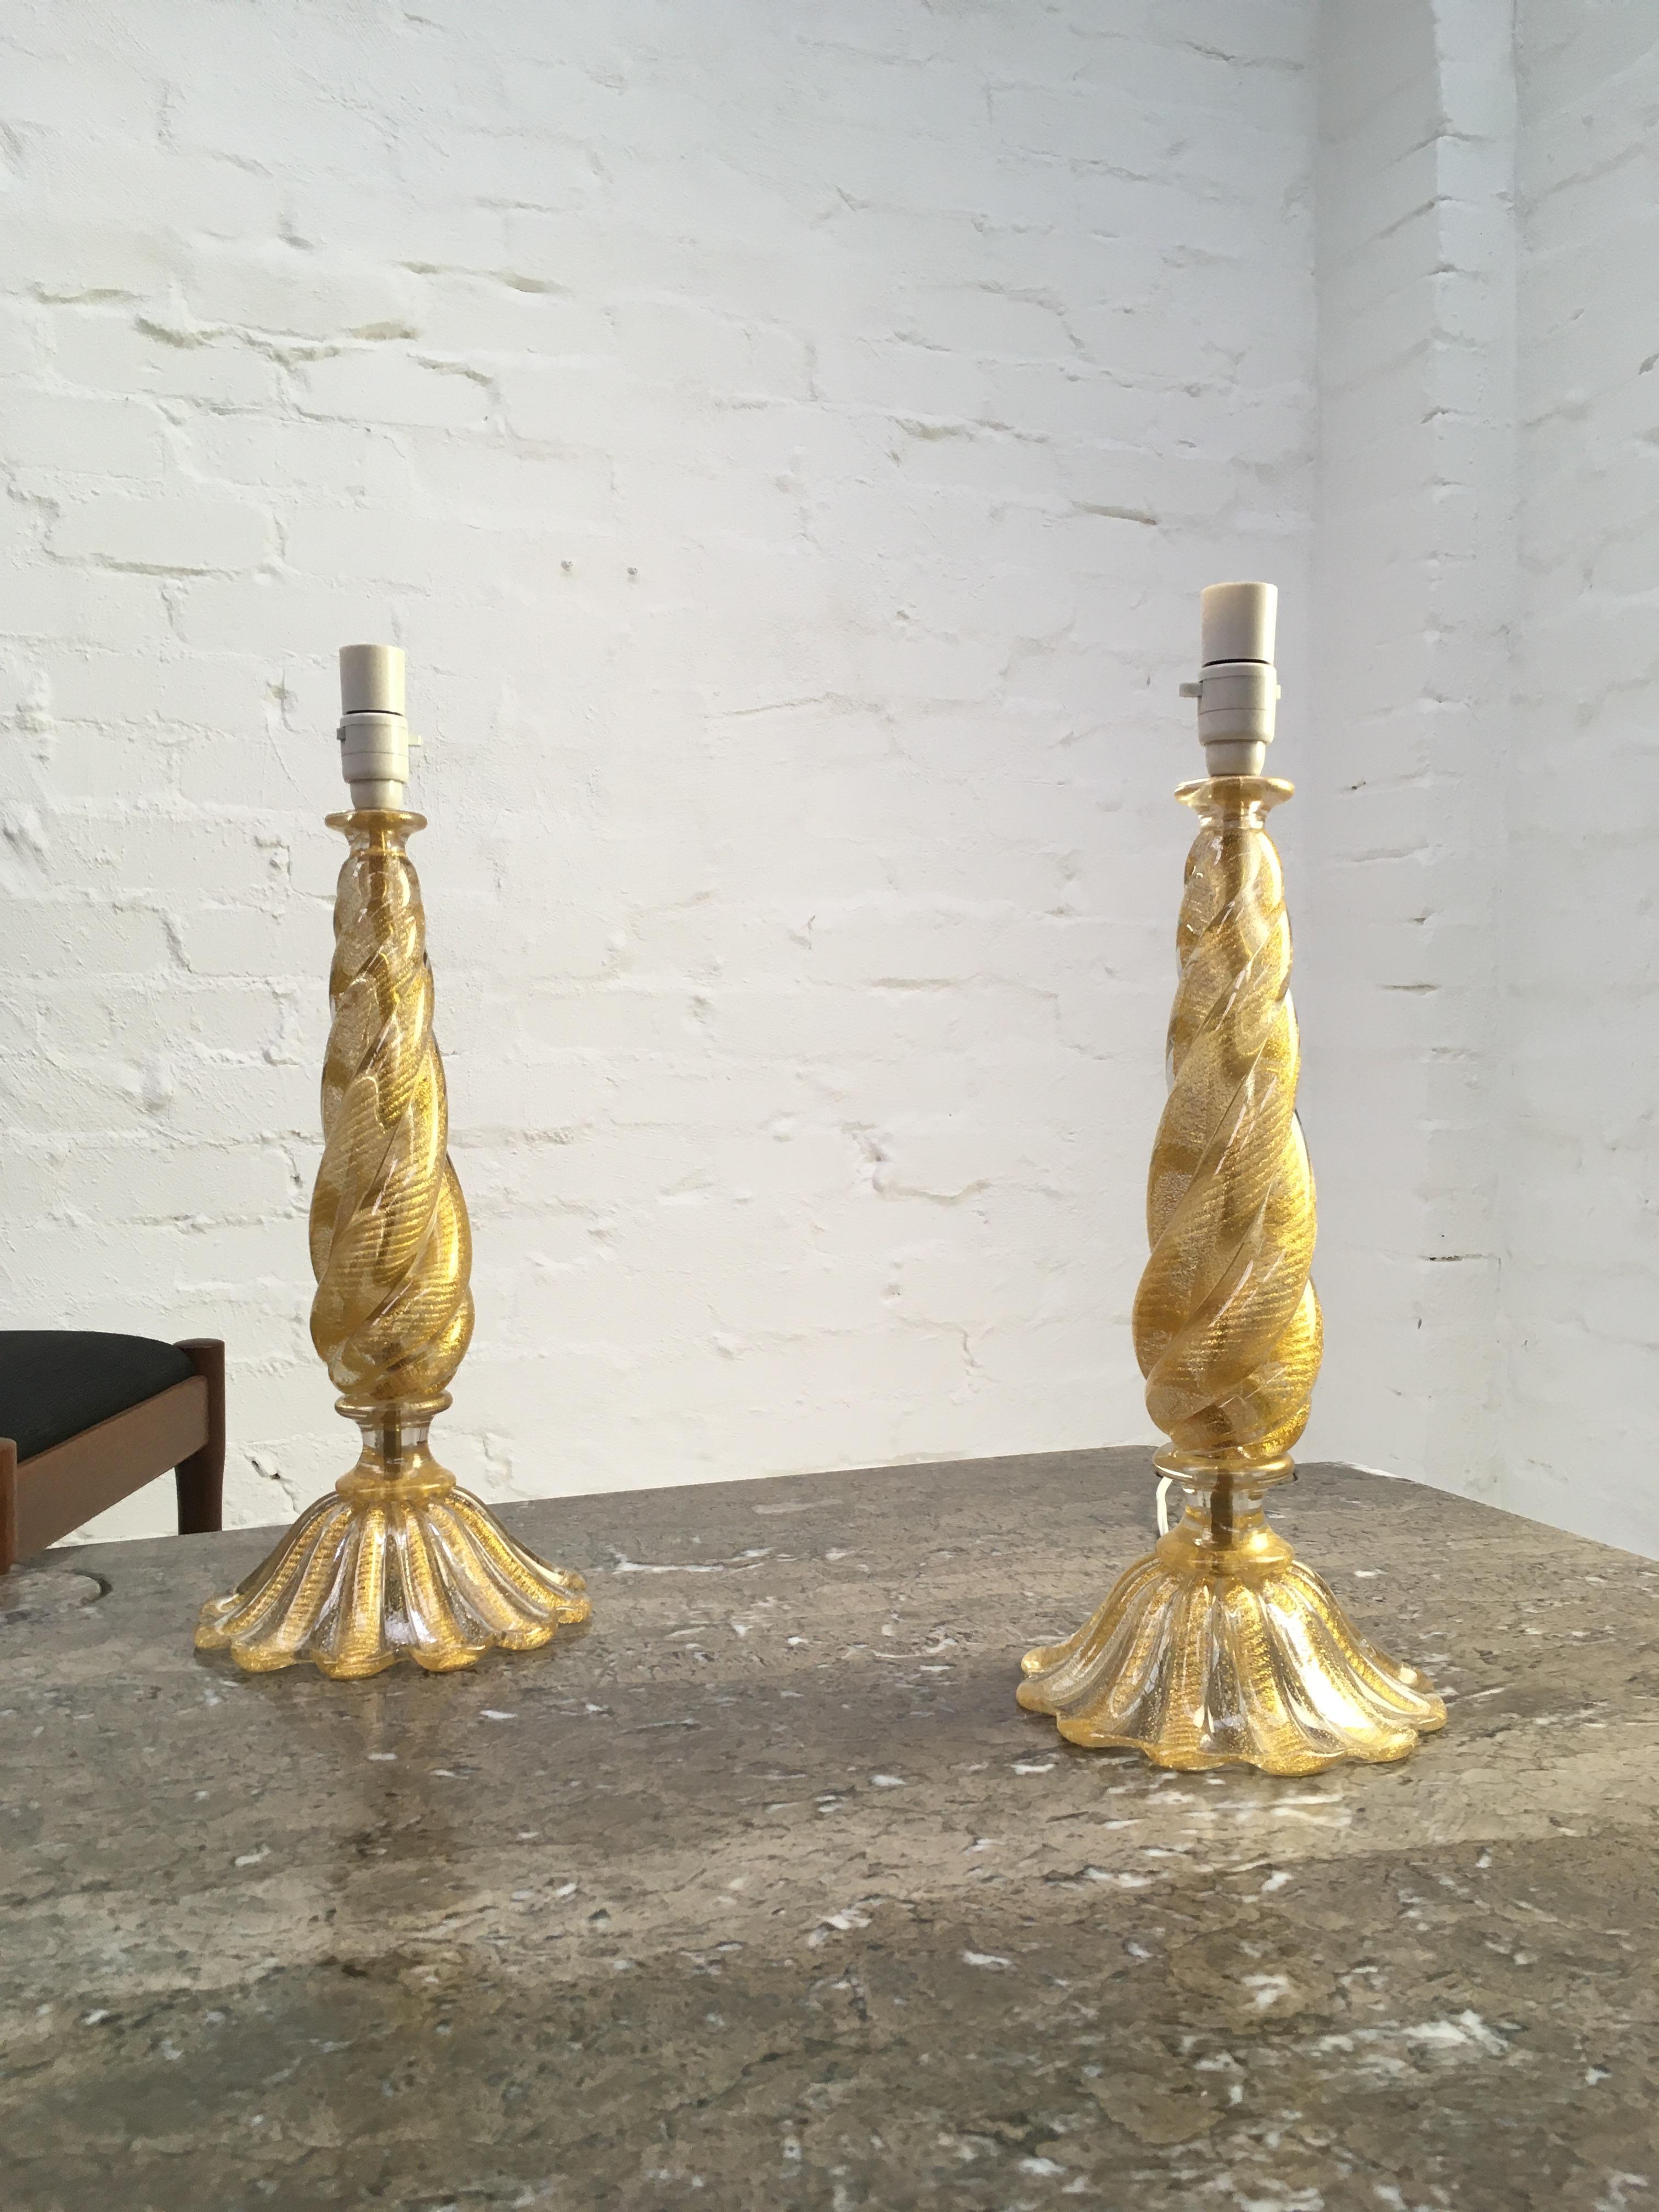 Pair of Barovier and Toso 'Cordonato D'oro' Murano Glass Lamps, Italy, 1950s In Good Condition For Sale In Melbourne, AU